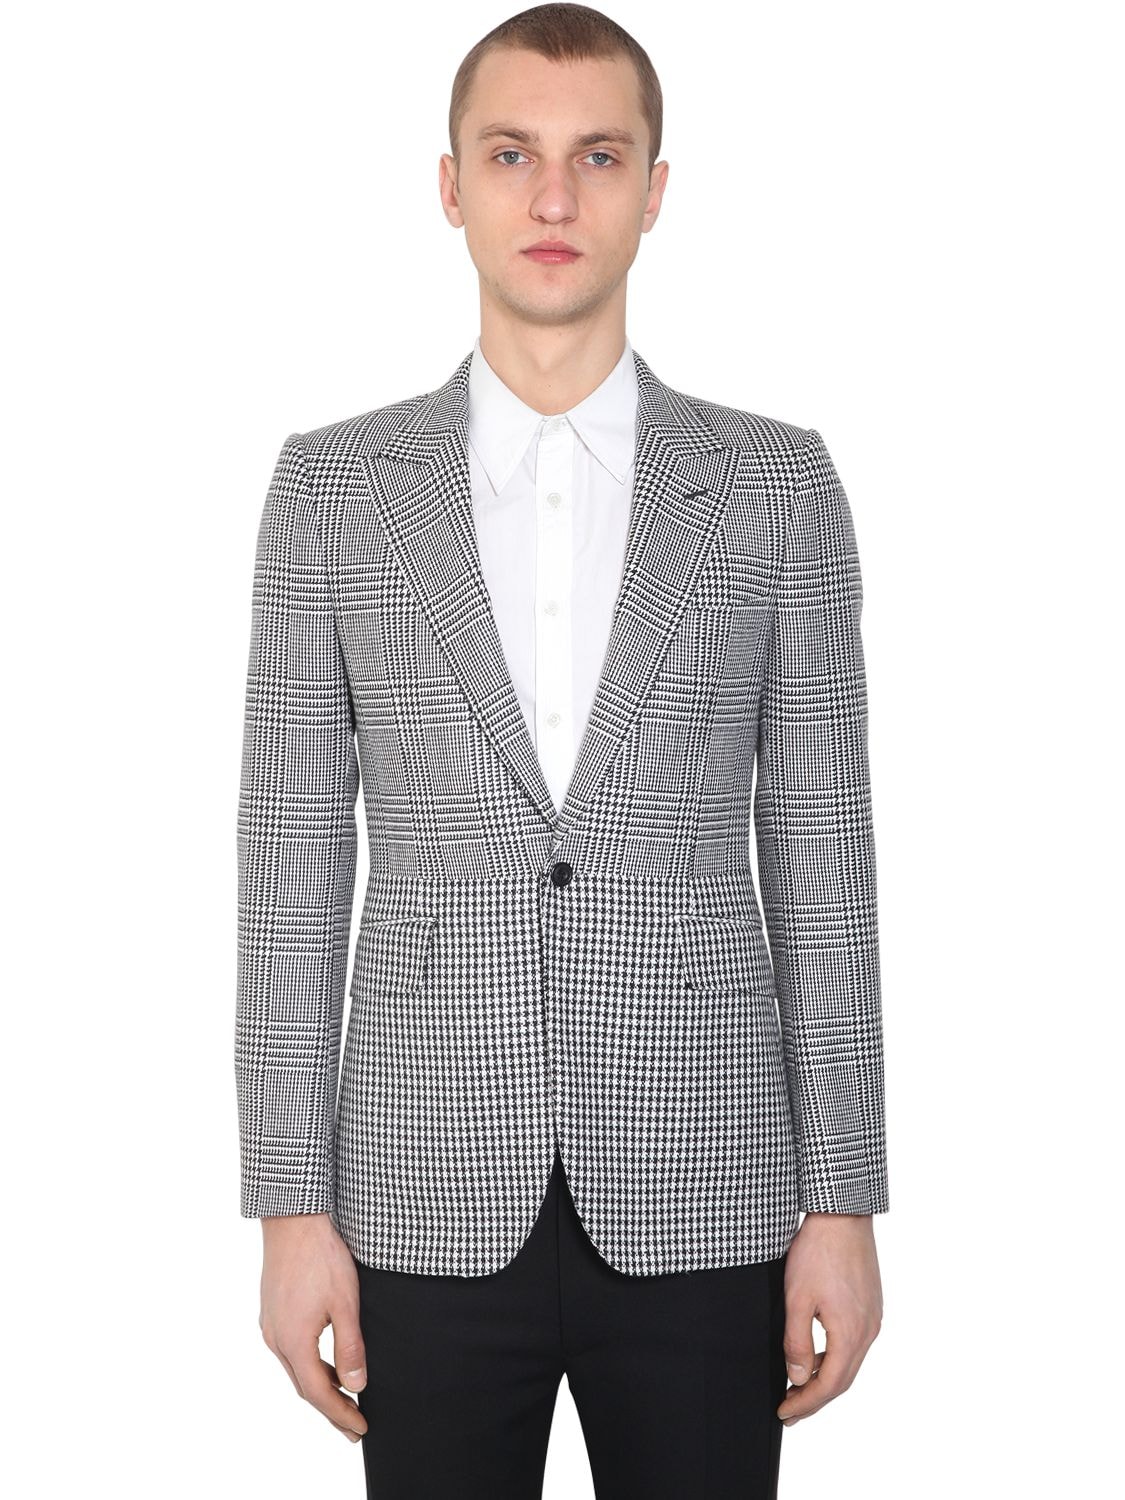 ALEXANDER MCQUEEN PRINCE OF WALES & HOUNDSTOOTH JACKET,70I1UO016-OTA4MA2